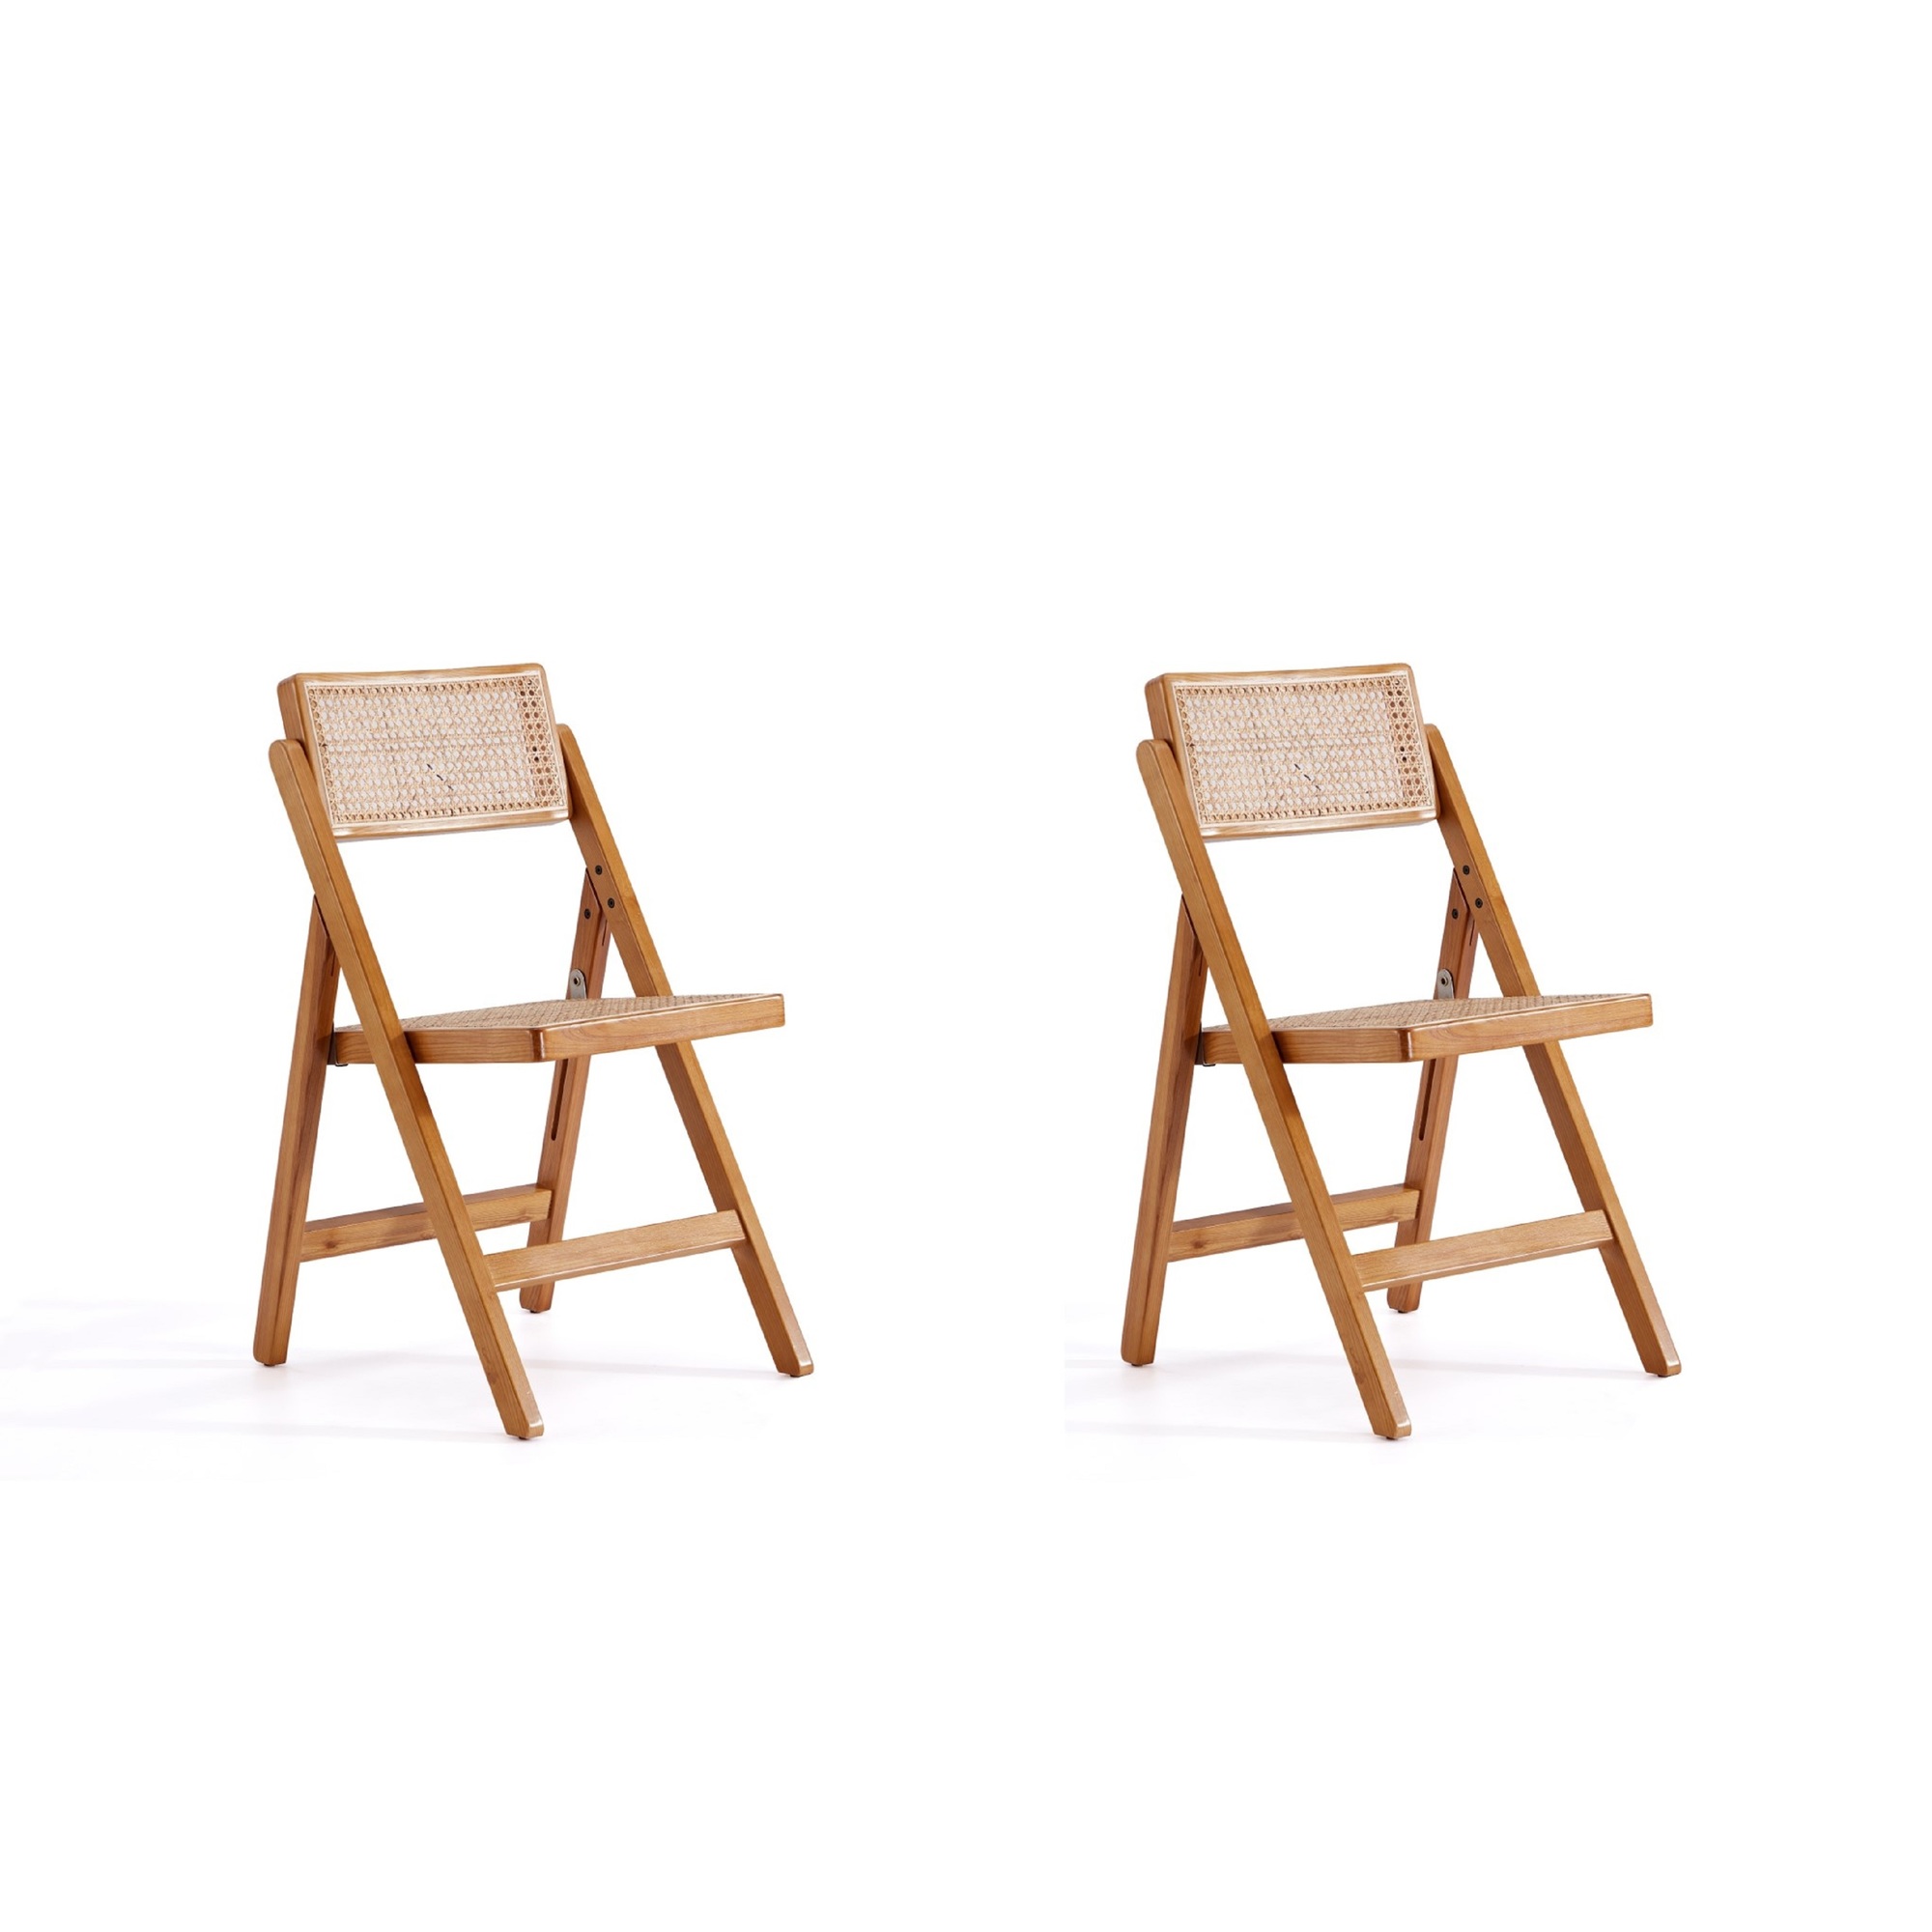 Manhattan Comfort, Pullman Folding Chair in Nature Cane Set of 2 Primary Color Natural, Included (qty.) 2 Model DCCA08